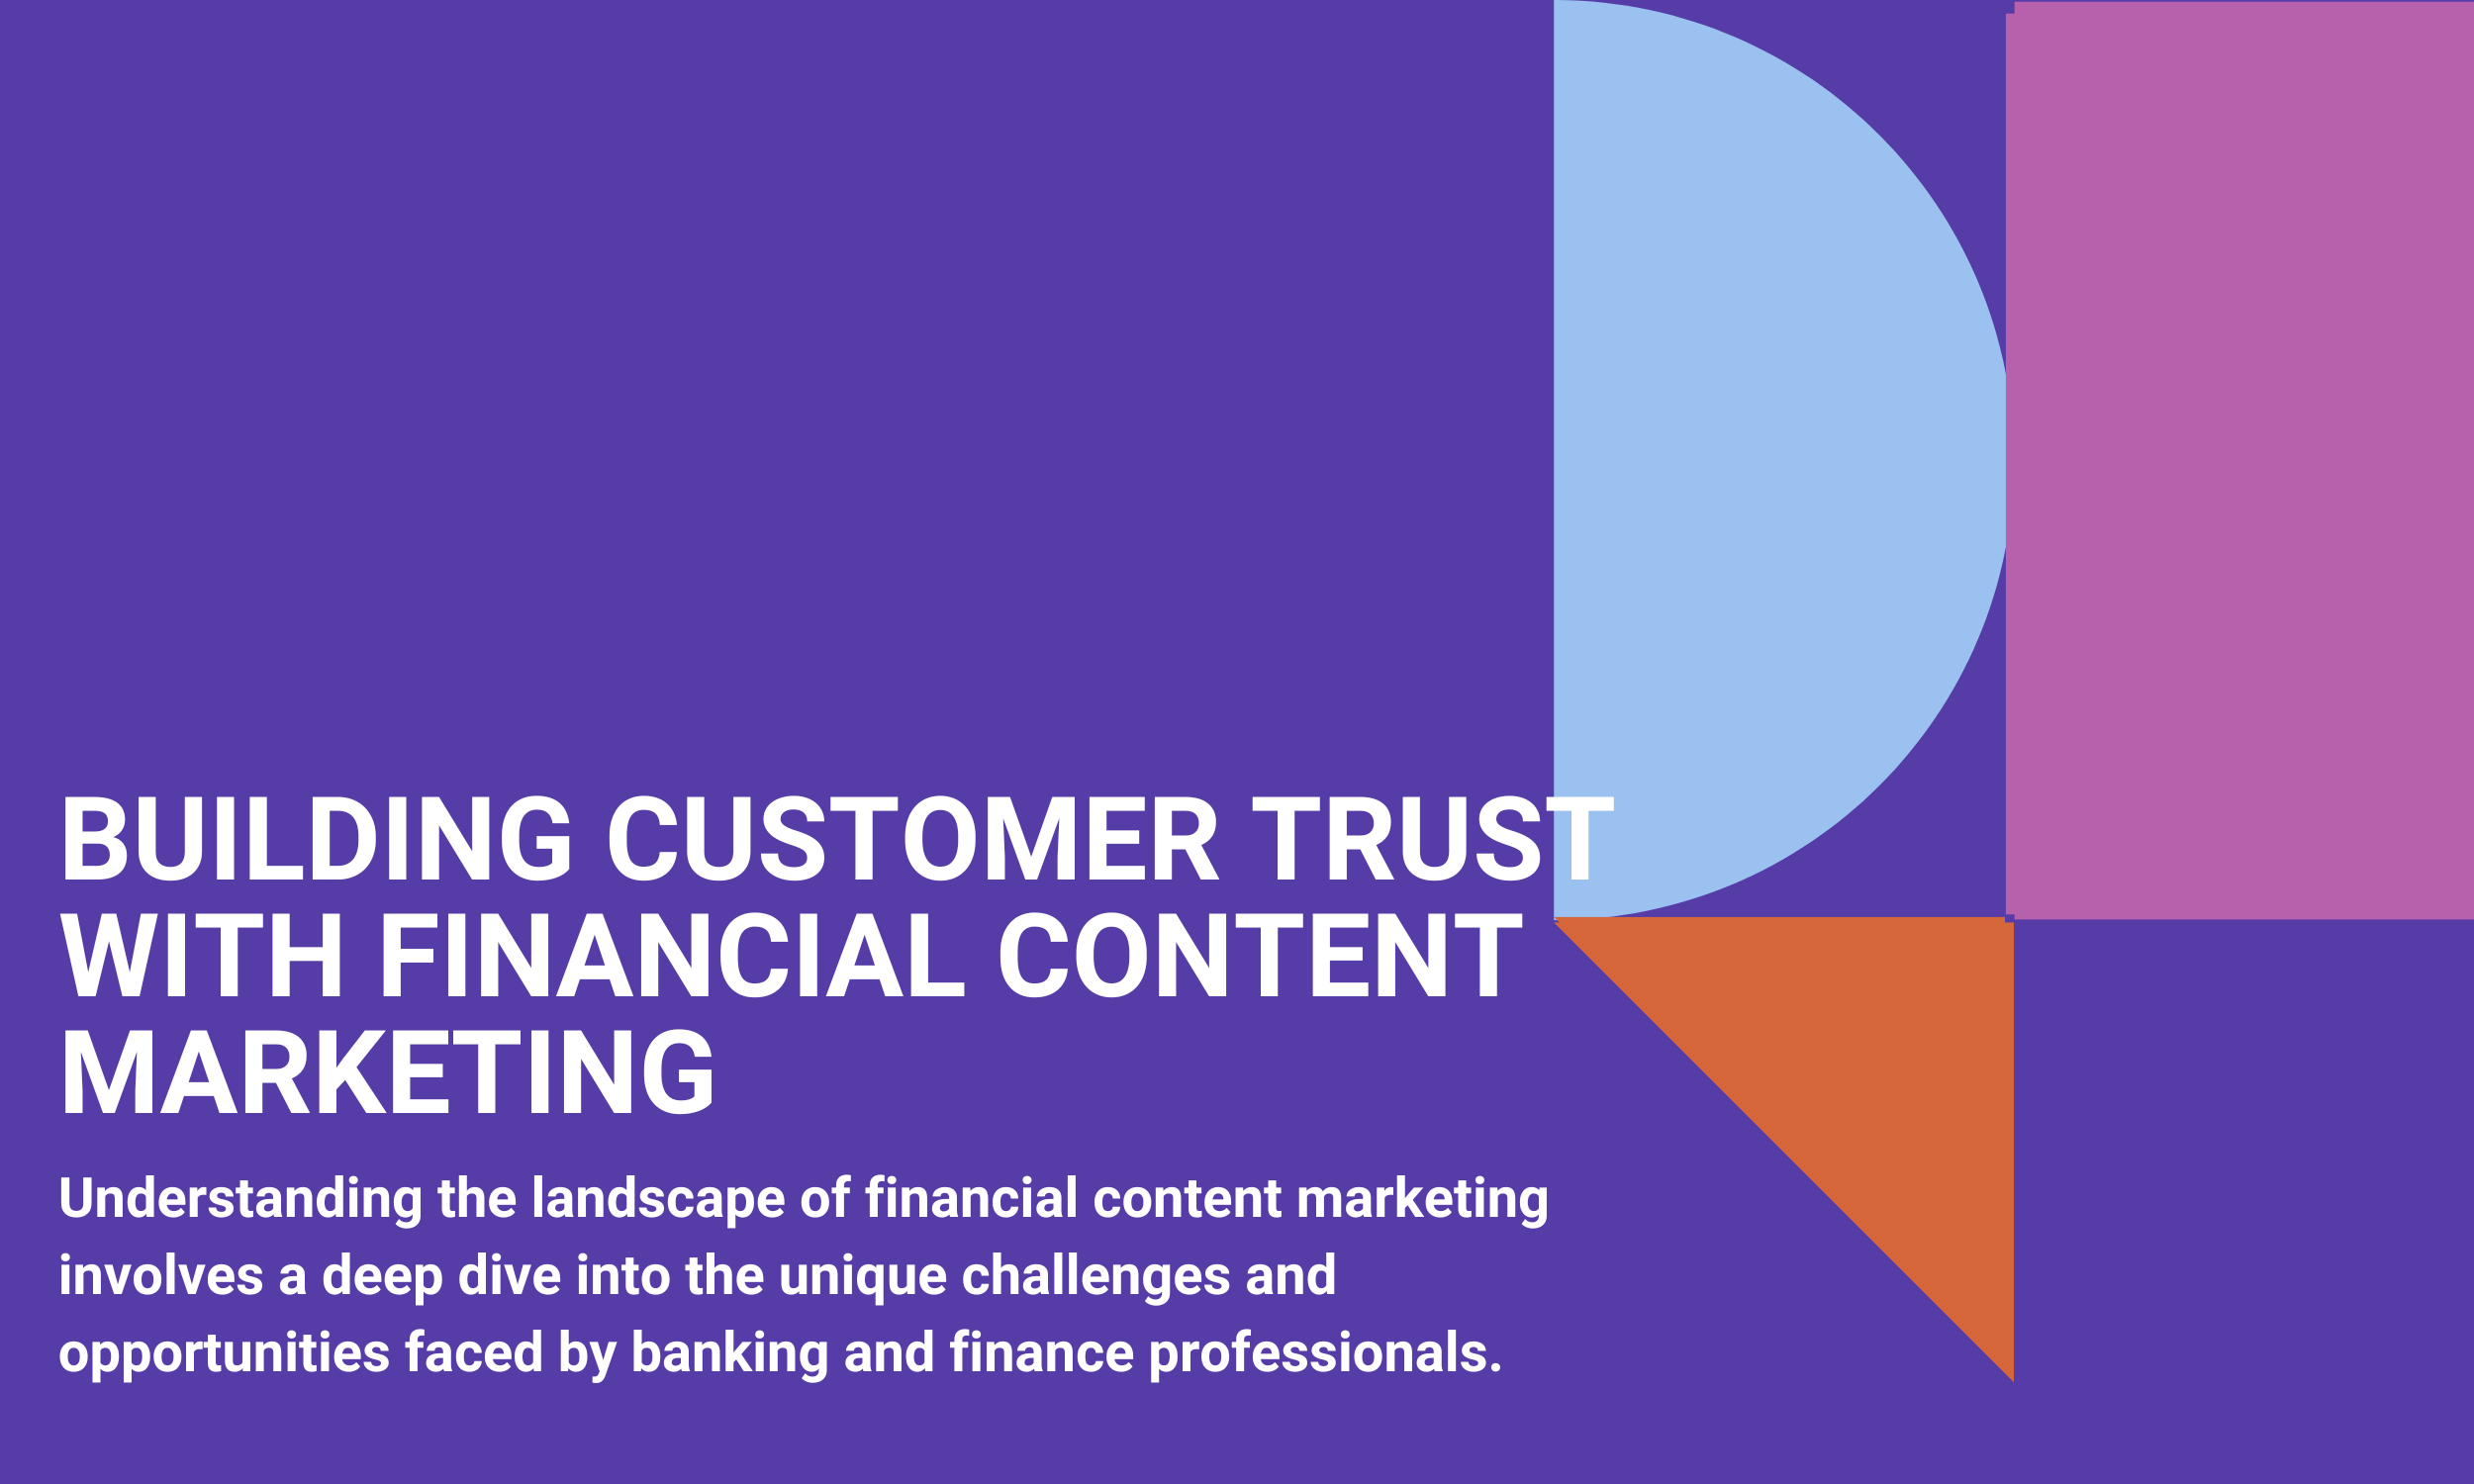 Building Customer Trust with Financial Content Marketing